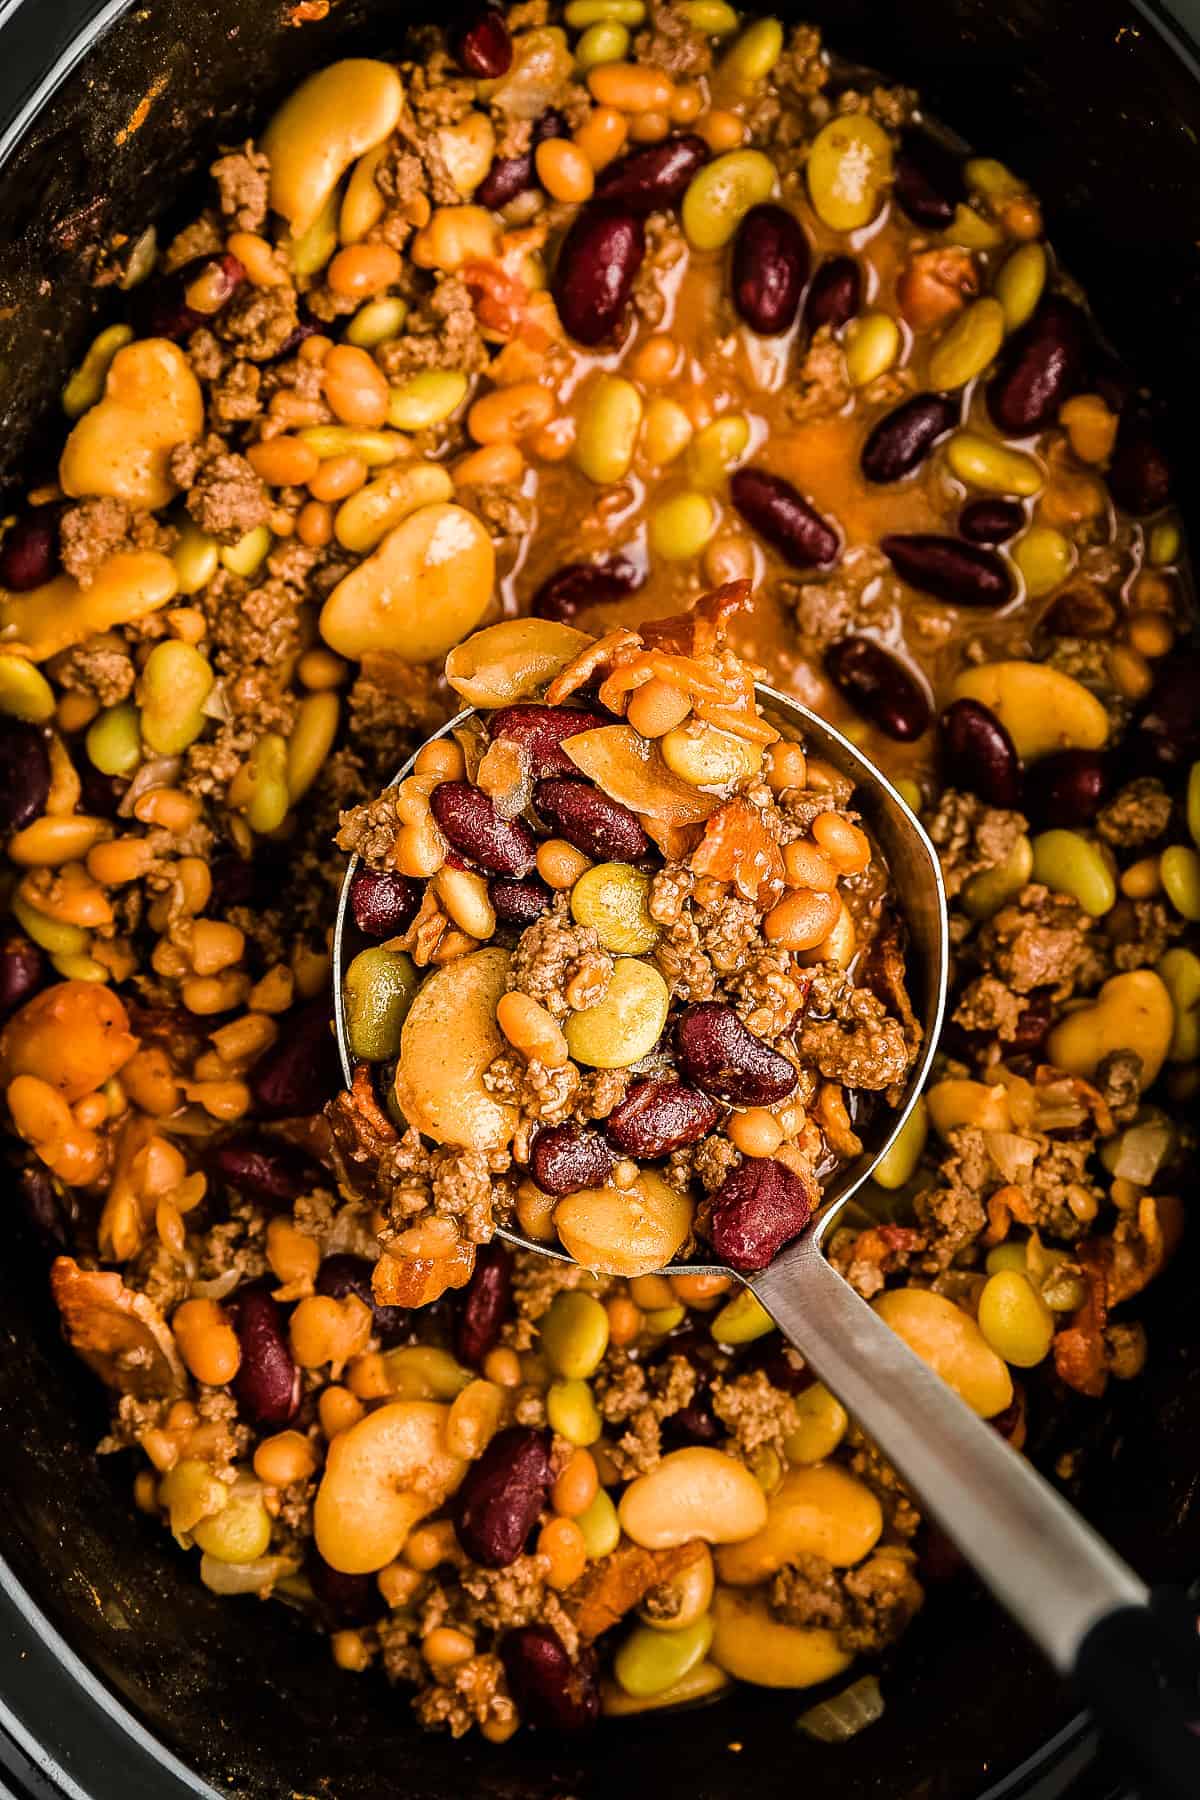 Overhead image of Calico Beans in slow cooker